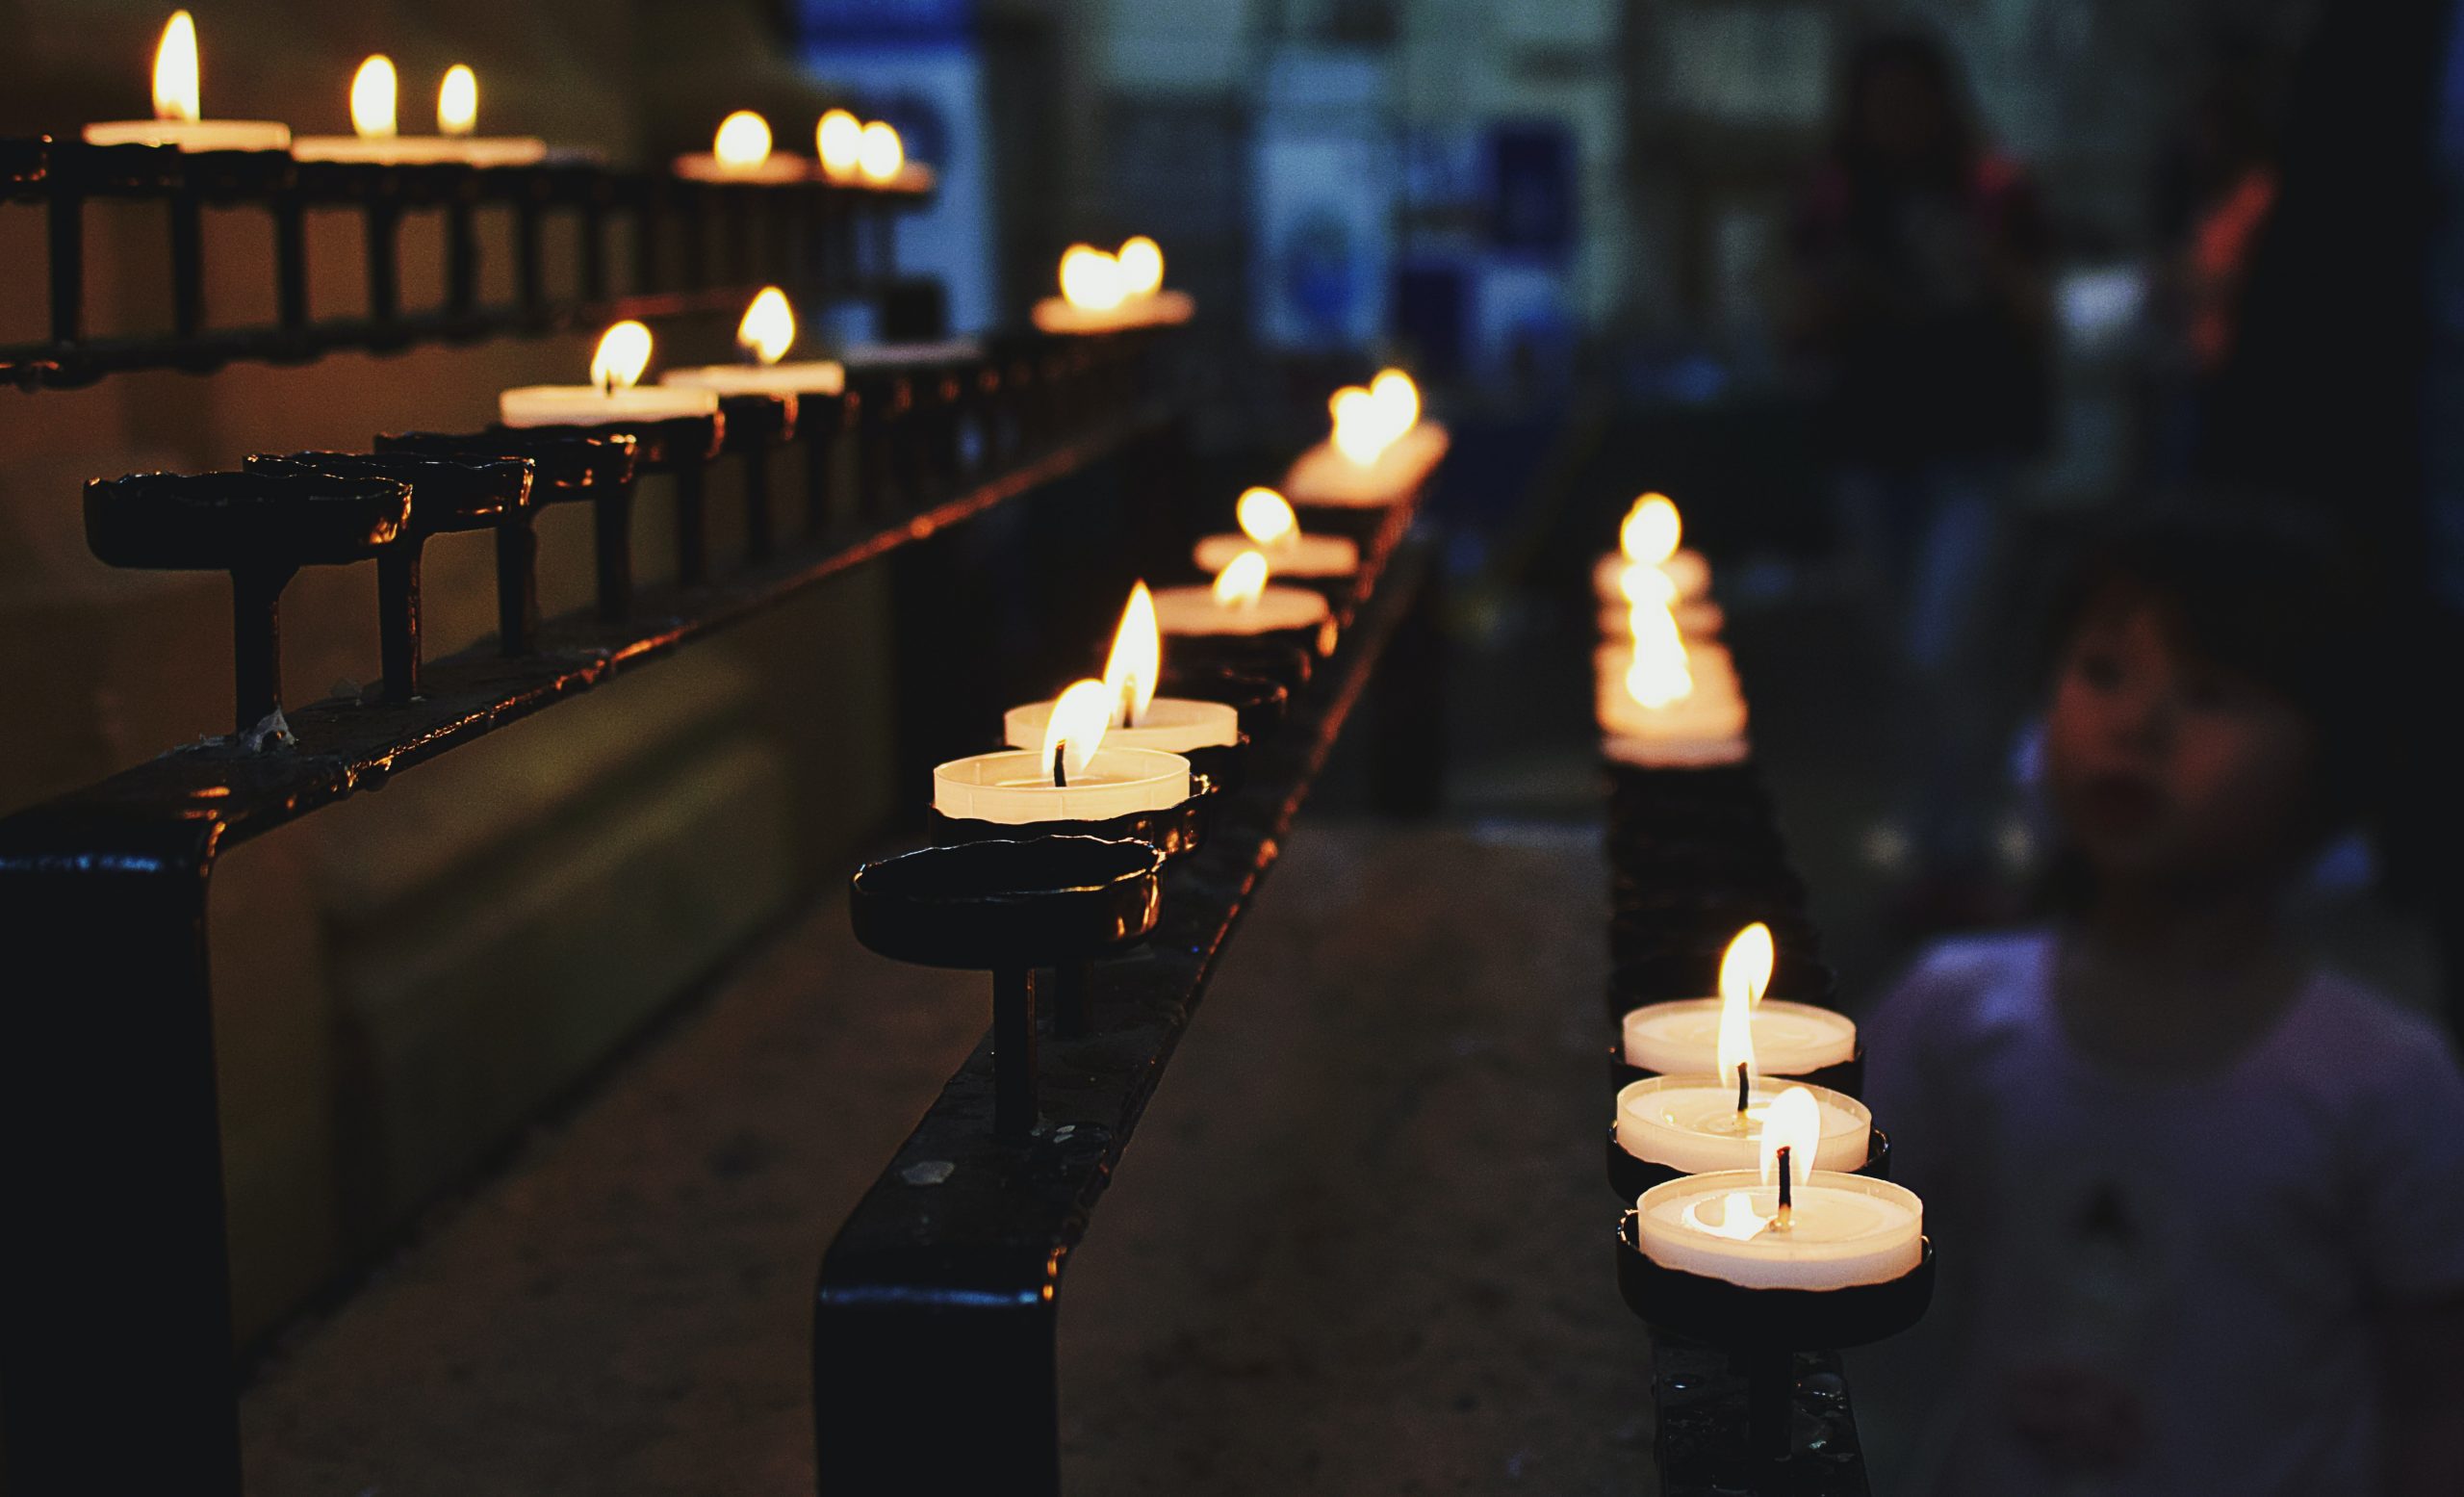 Candles are lit within a church setting